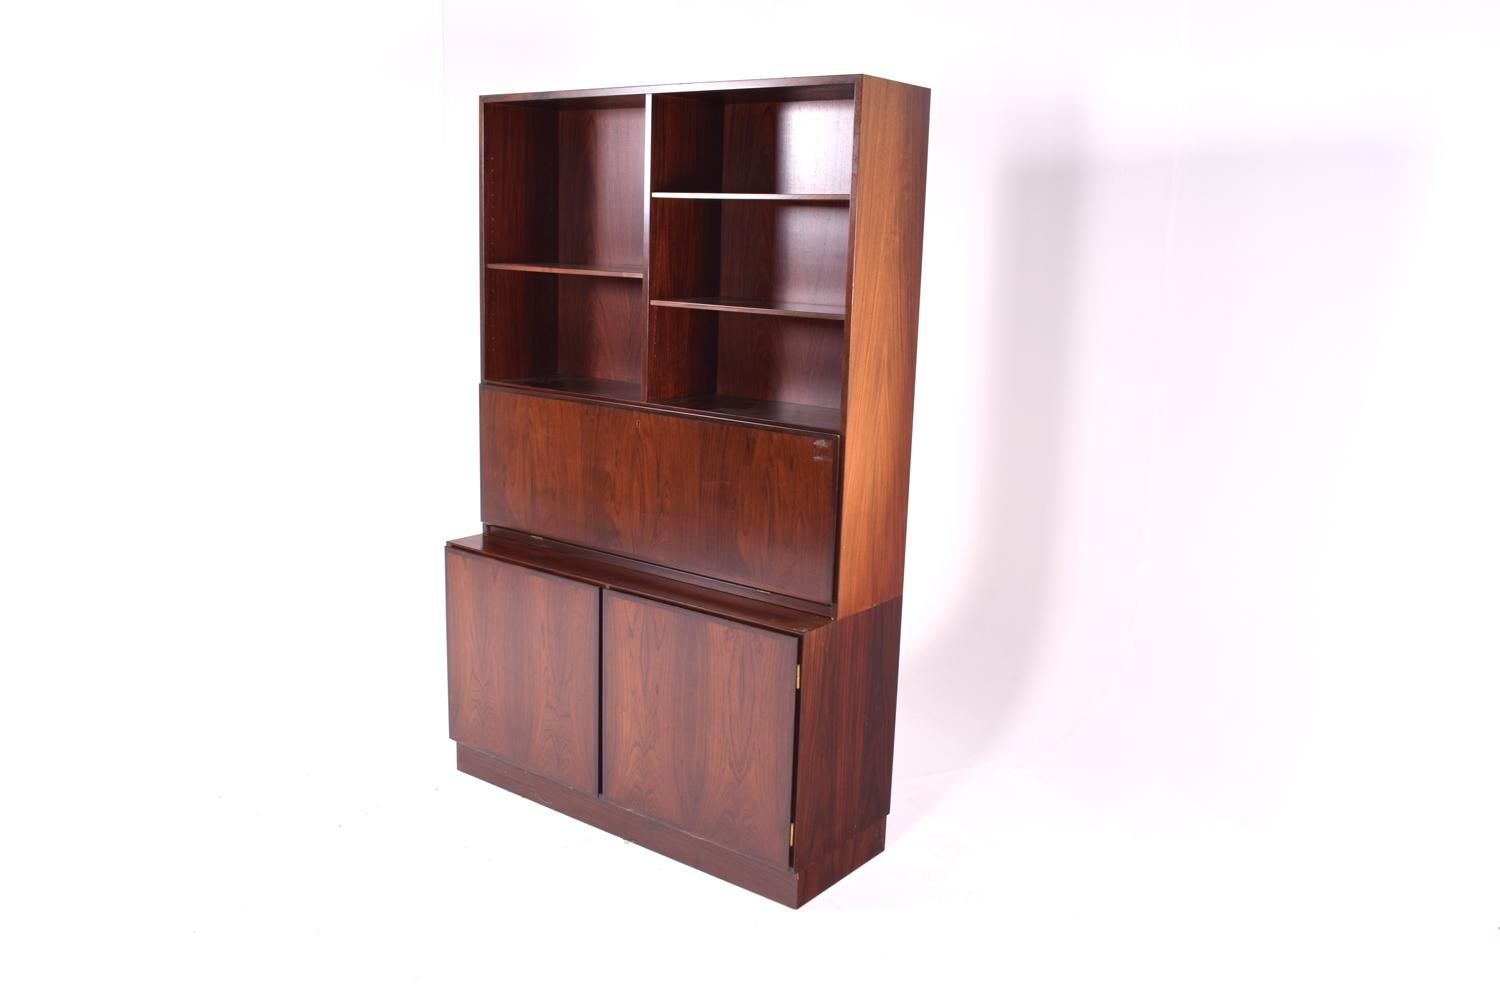 Rosewood bookcase with 6 bevel edge shelves. Desk compartment fitted with interior drawers. Platform base. Elegant and exotic rosewood veneer in a geometric clean design by Gunni Omann.